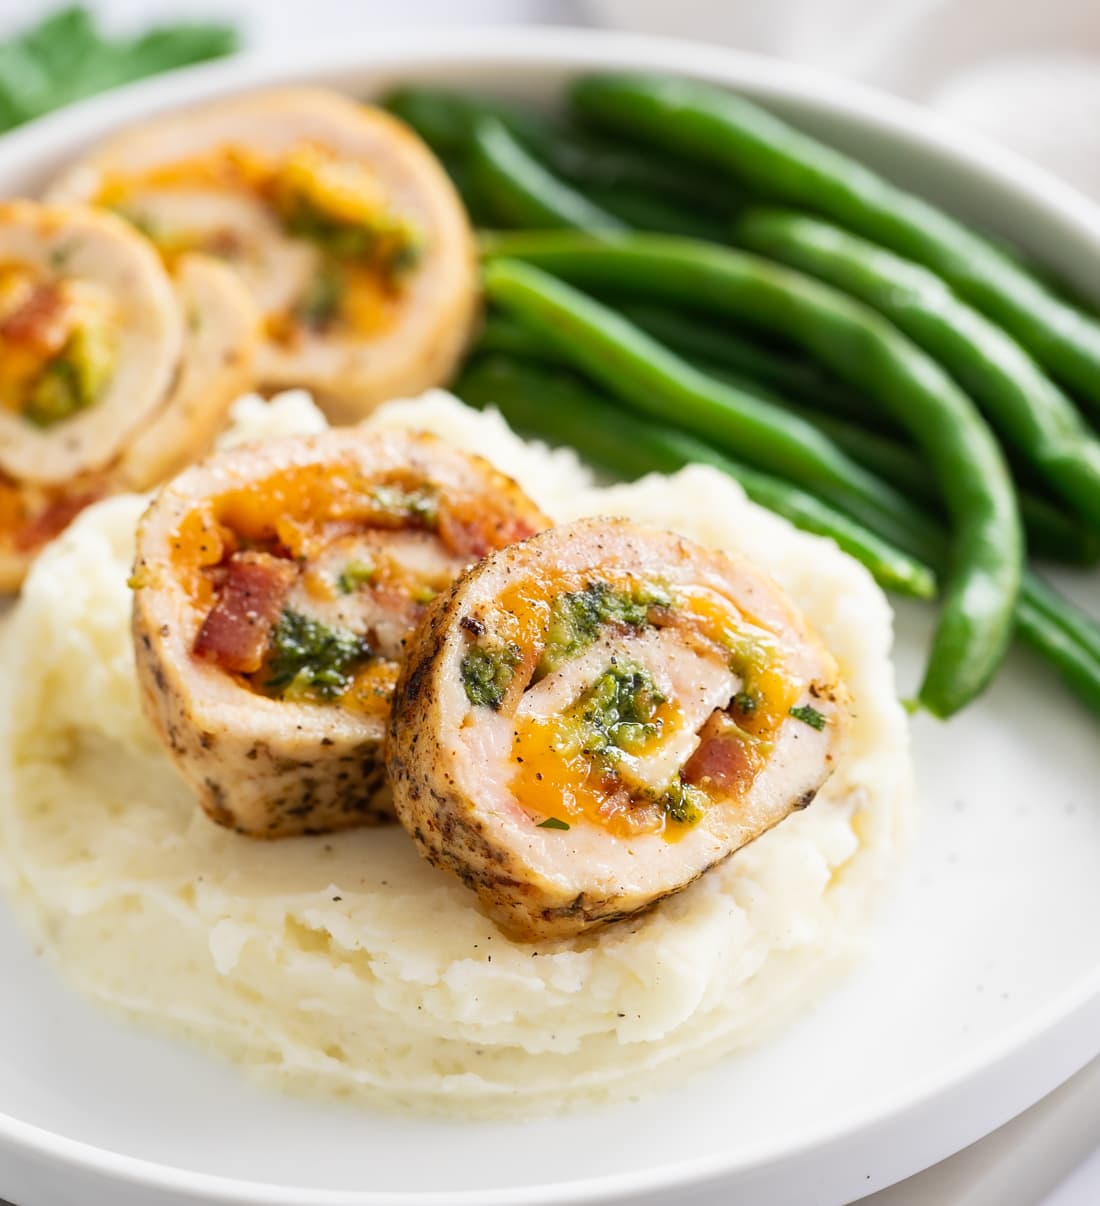 Slices of Chicken Roulade on top of mashed potatoes with green beans in the background.